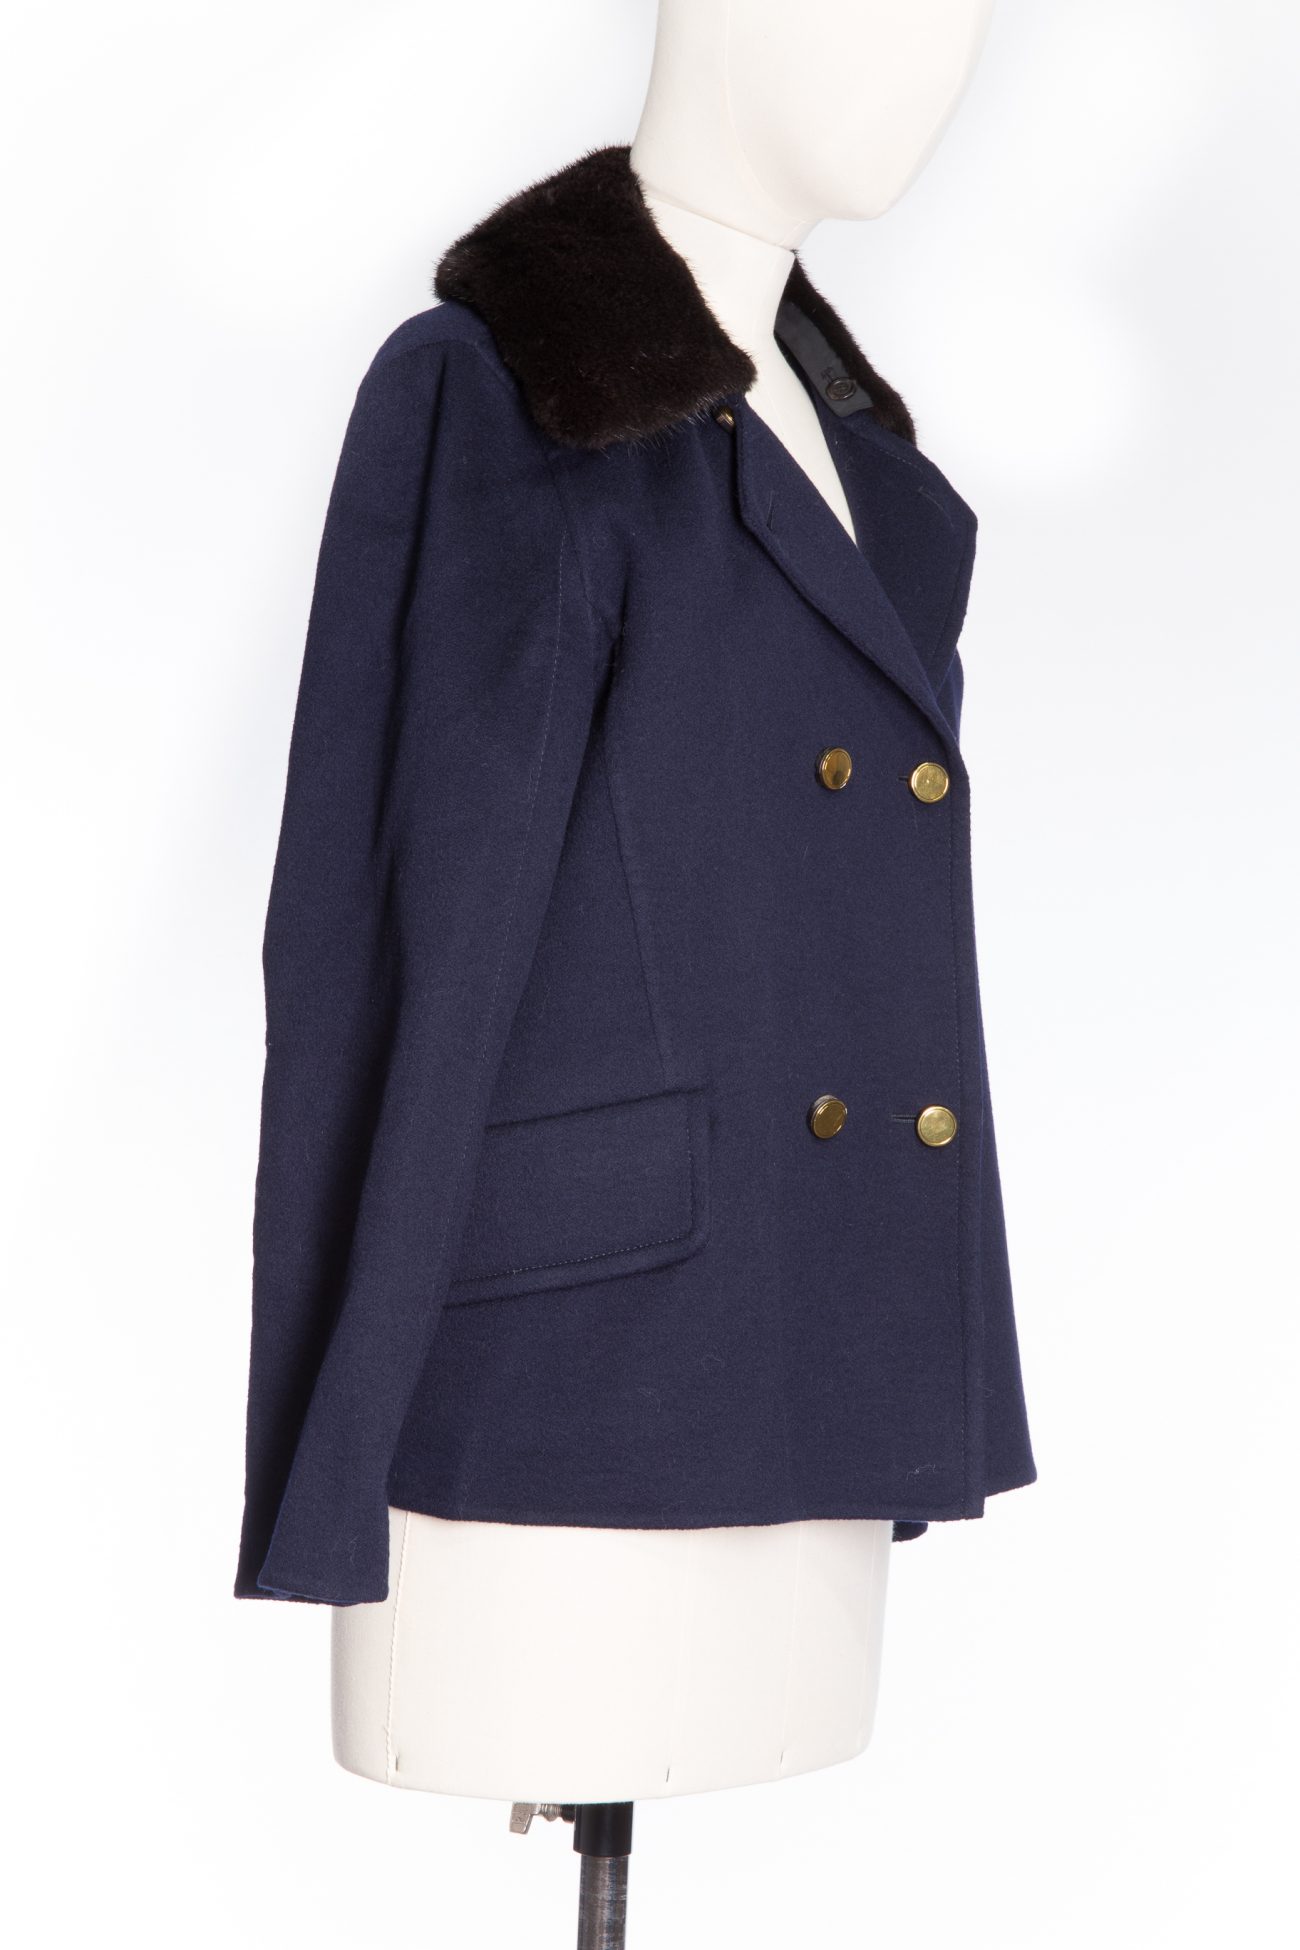 Louis Vuitton Cashmere Jacket with Mink Removable Collar 